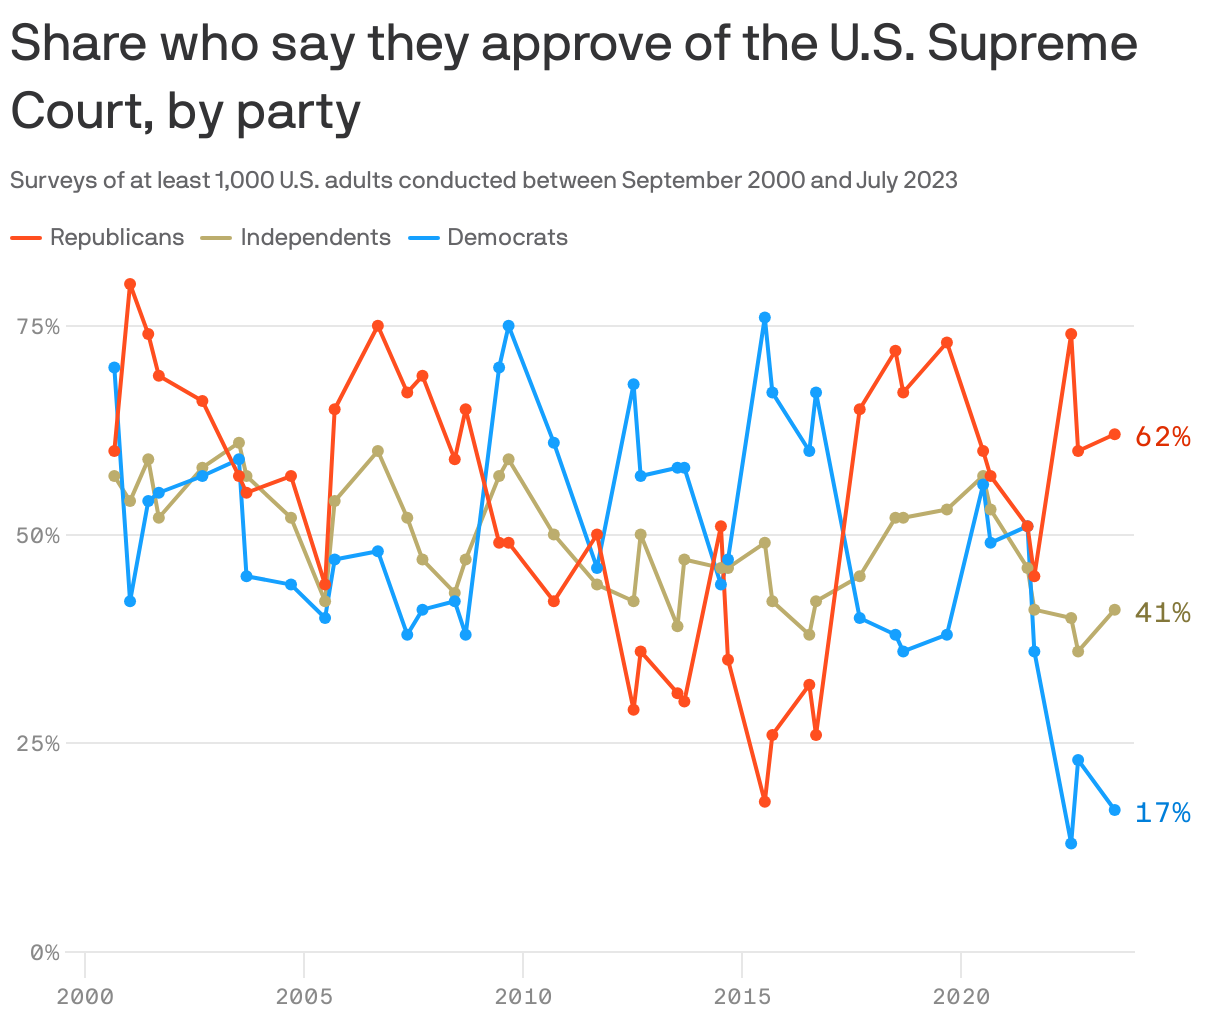 Share who say they approve of the U.S. Supreme Court, by party